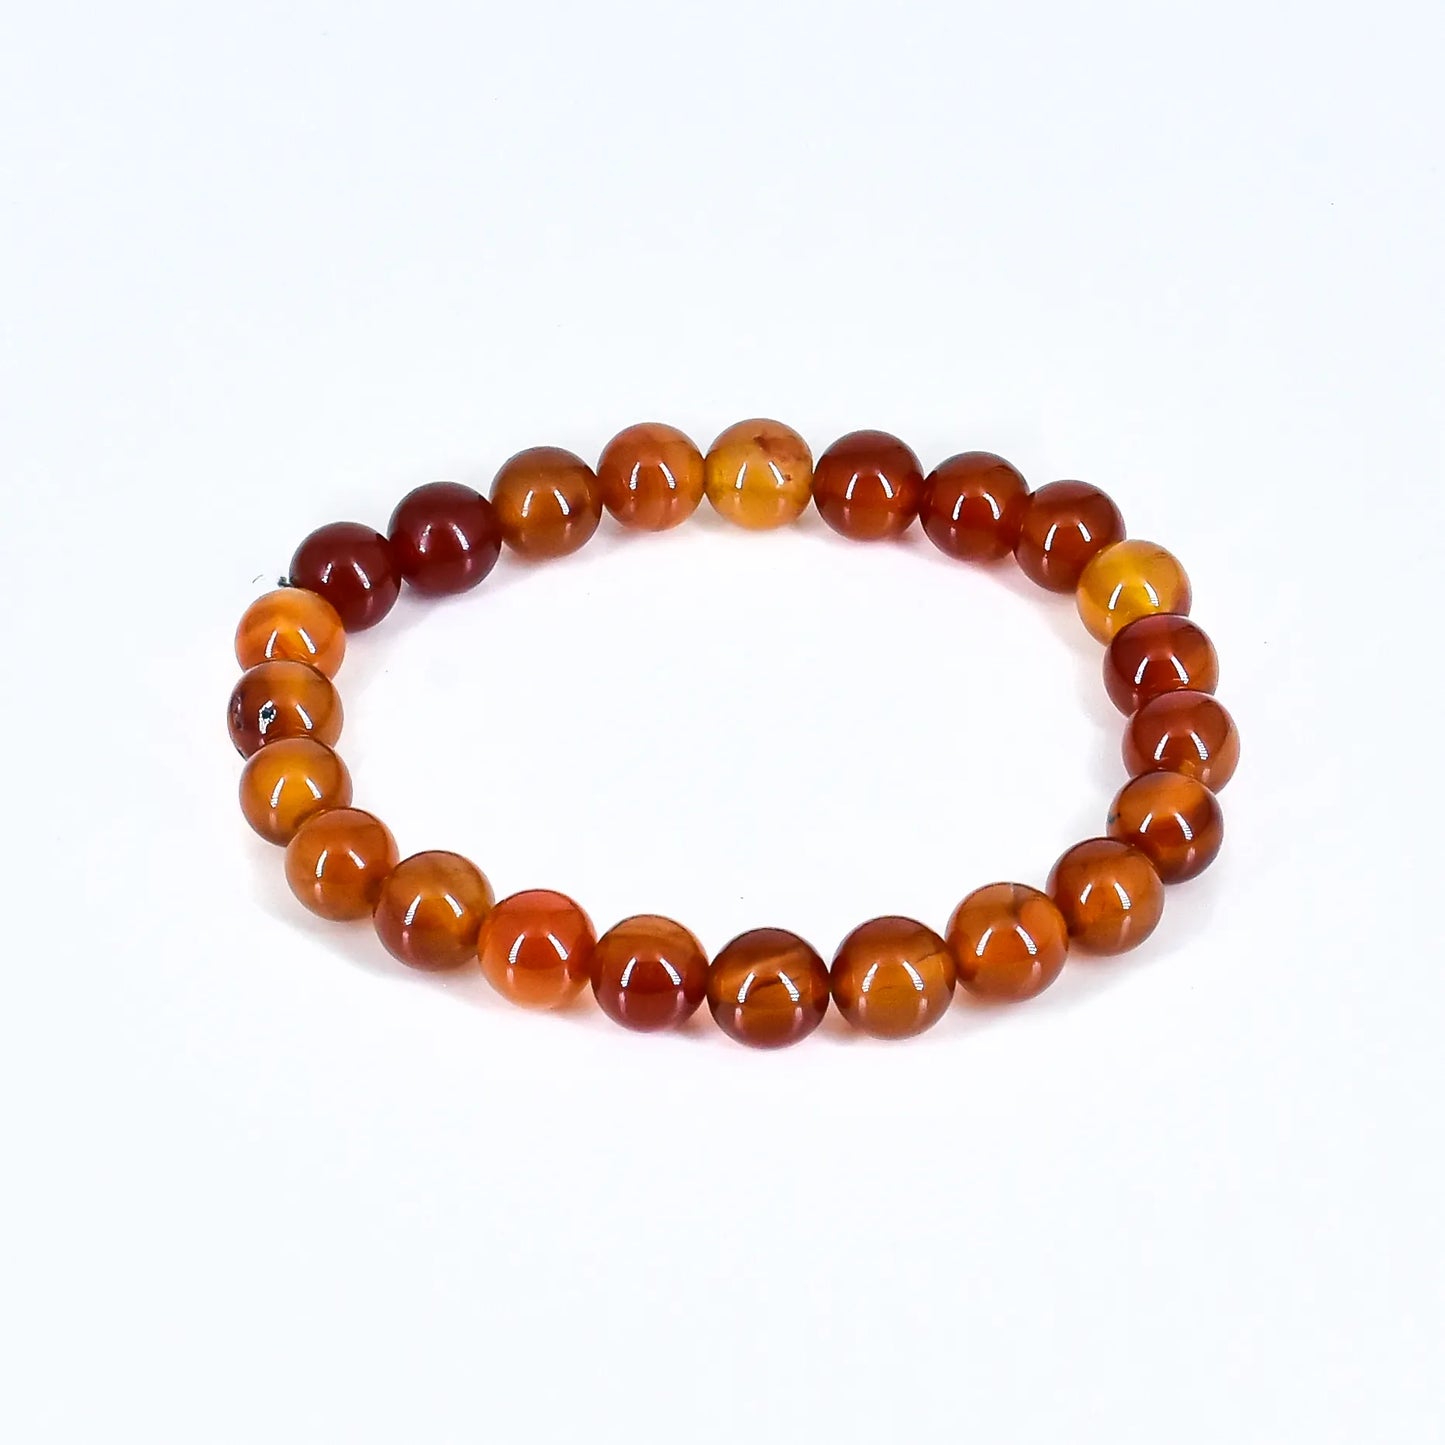 Red Aventurine Crystal Stone Bracelet for Passion and Empowerment 